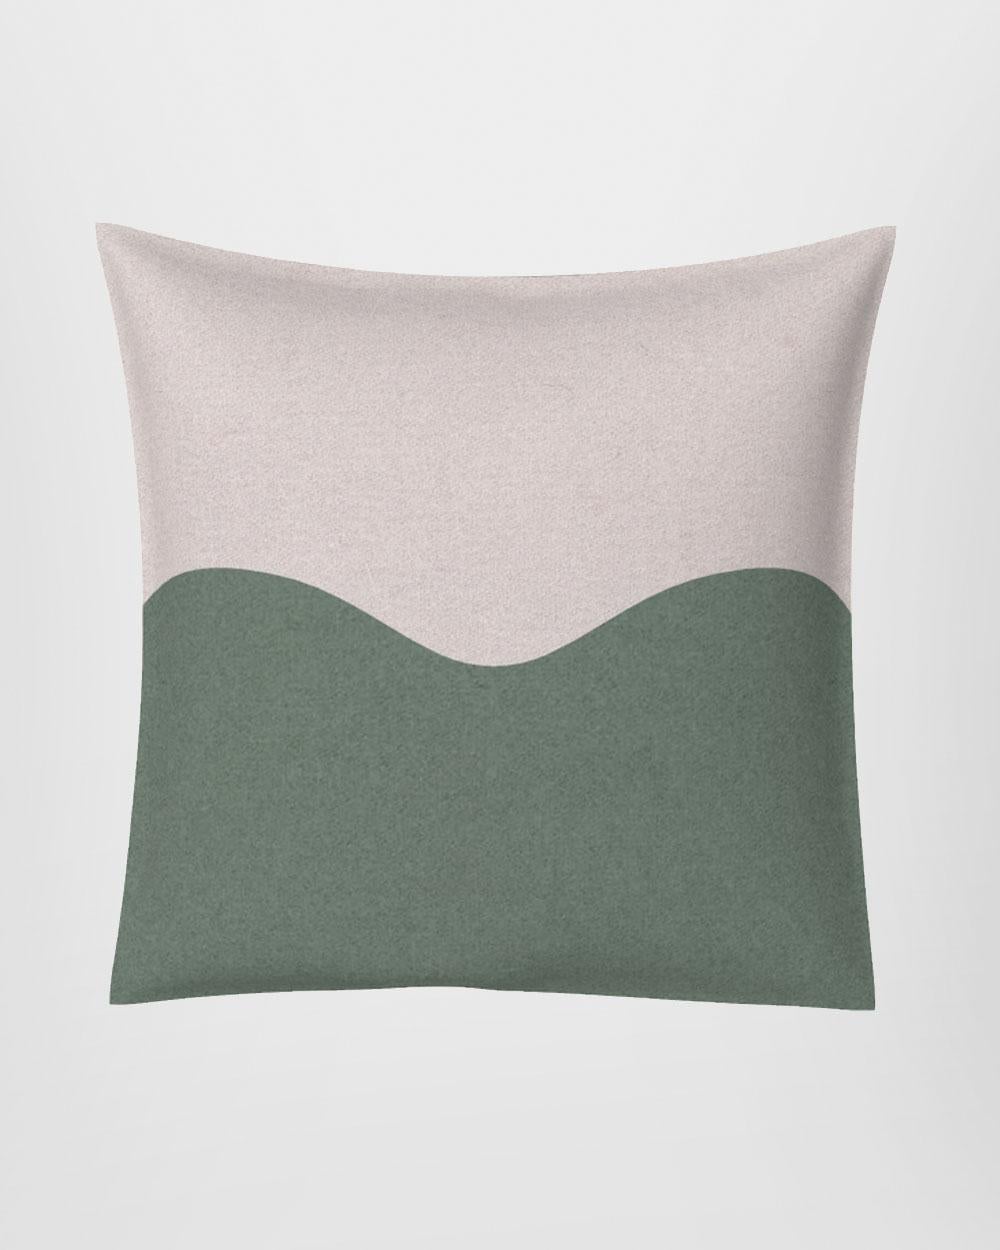 
It was by looking to tradition, and at the iconic references that have made the company’s history, that Paola Pastorini was inspired for the Curved Cushions collection. Made with hand-sewn Kvadrat fabric in pure wool, the cushions are